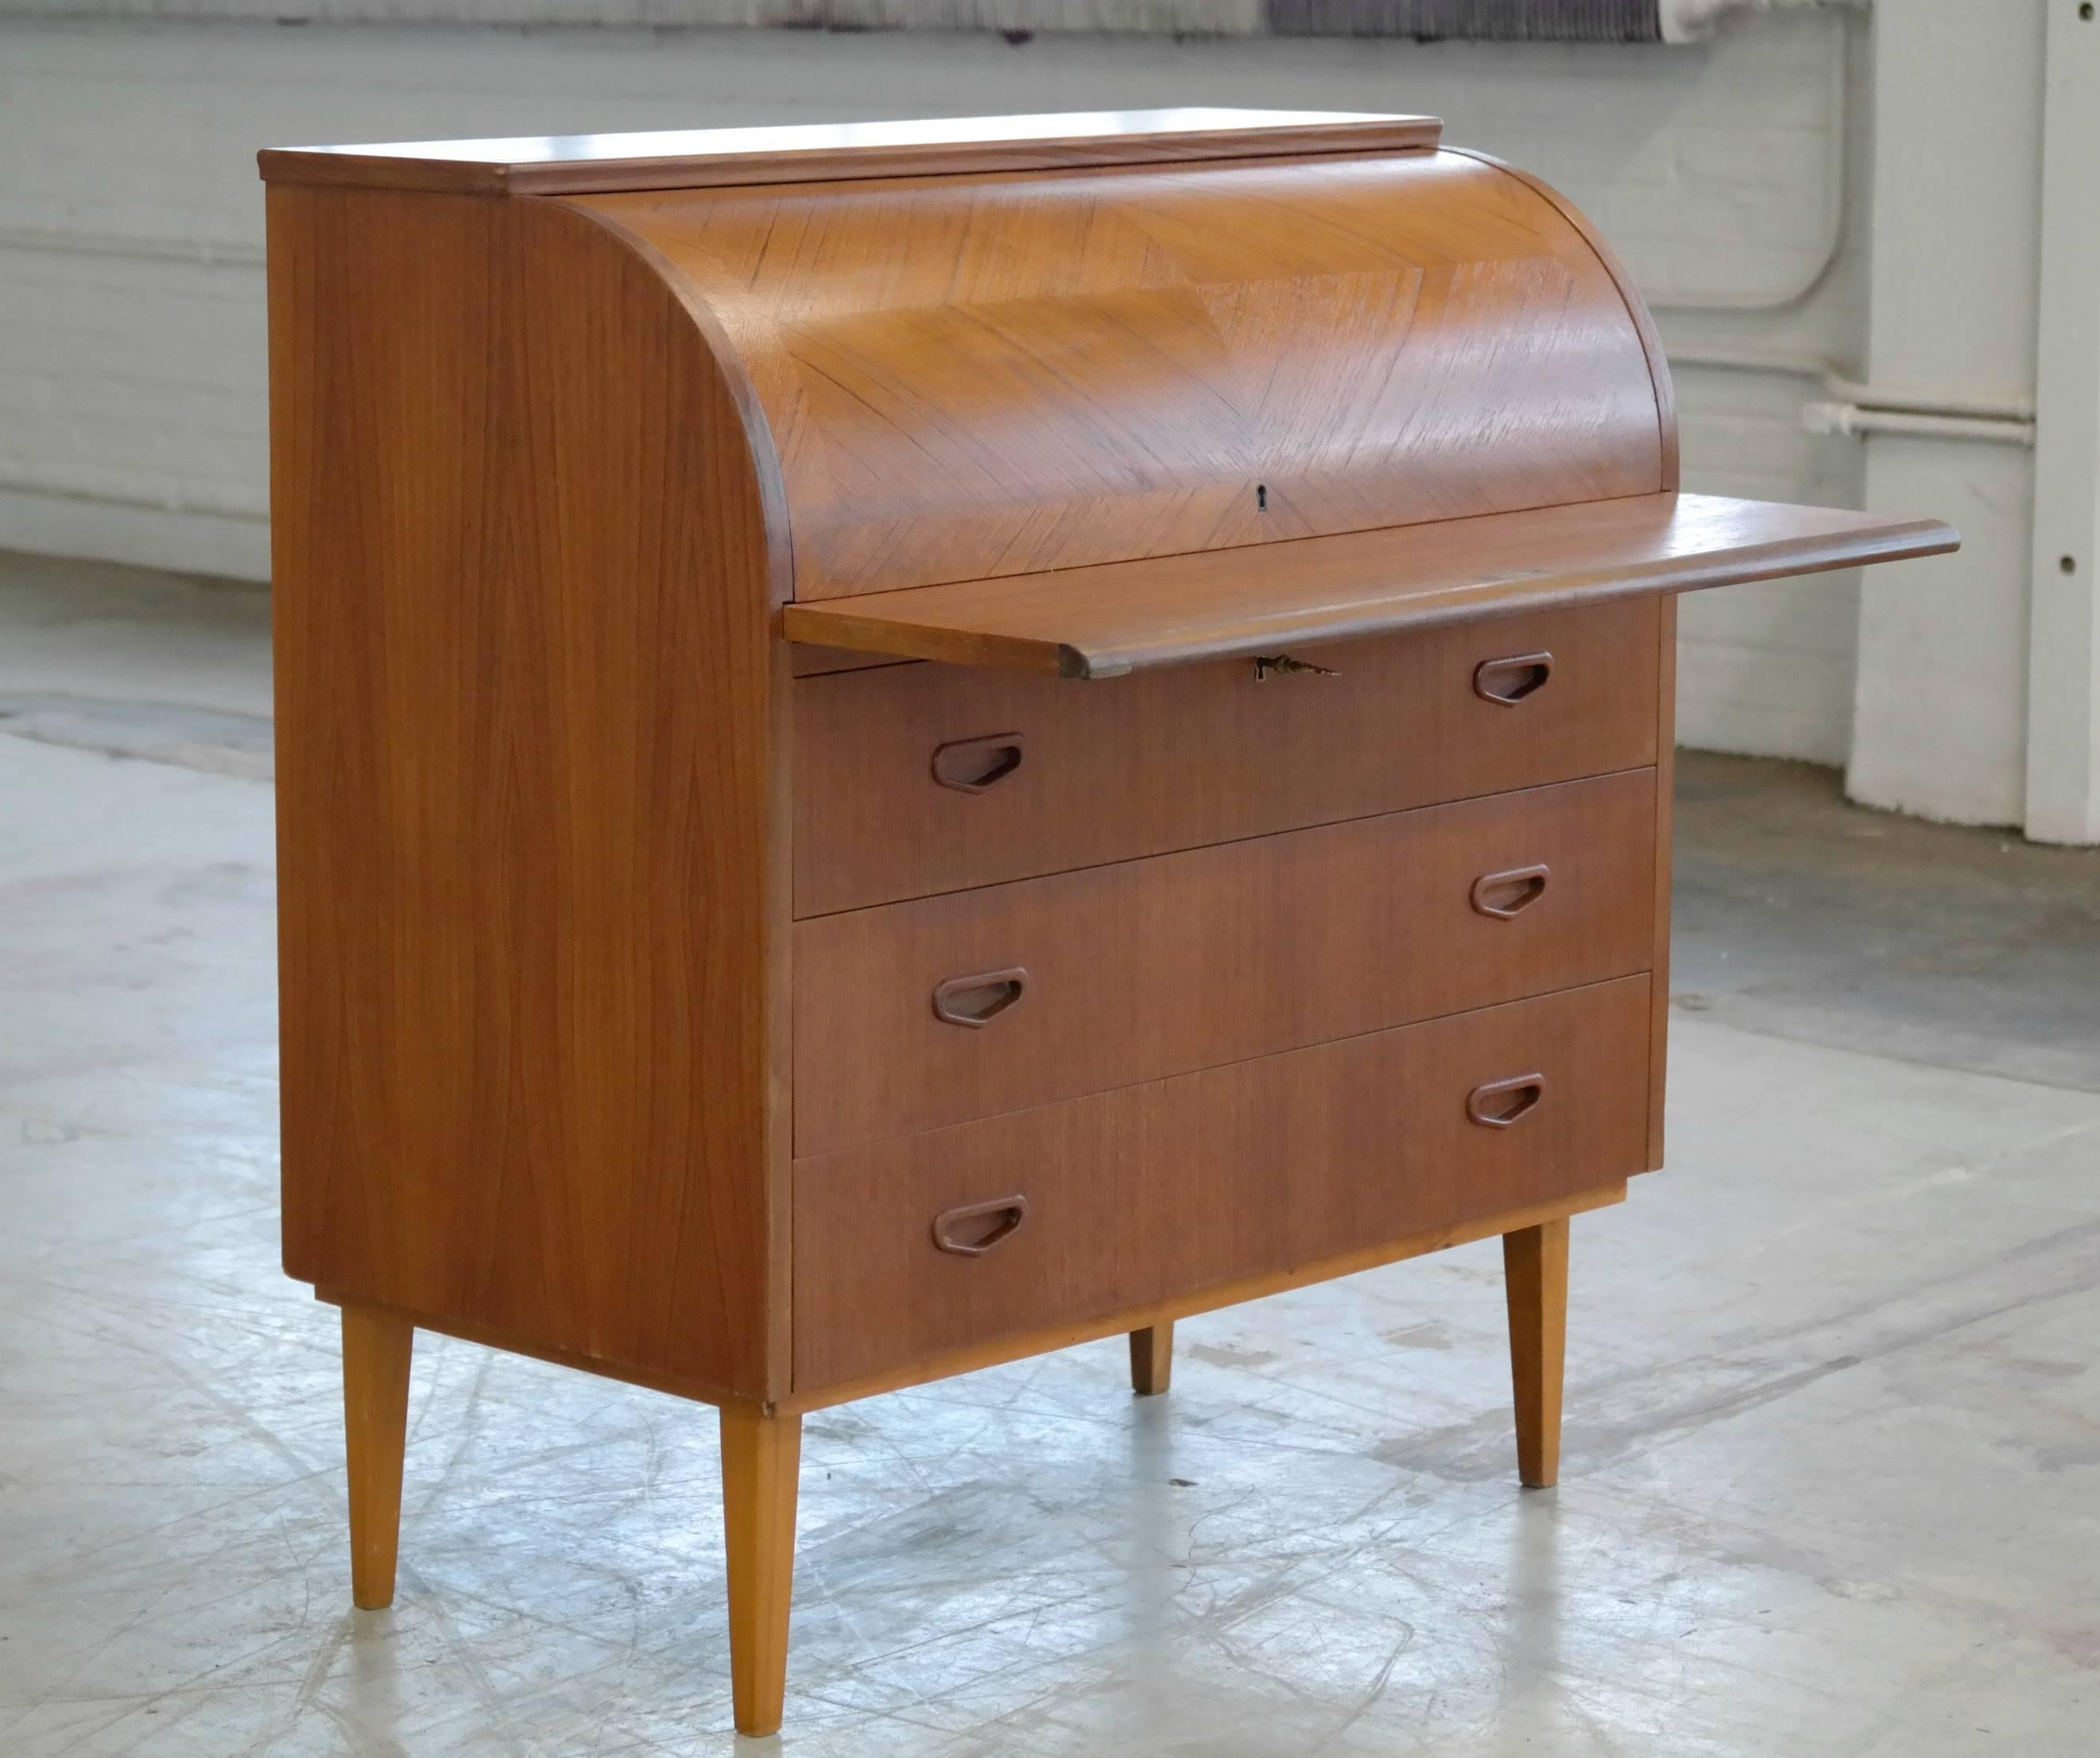 This piece is a bit of an unusual combination of desk or secretary and large dresser and it makes for quite a nice storage piece for the bedroom, where is can work as a dresser and workspace/organizer for the laptop with the roll-top and the